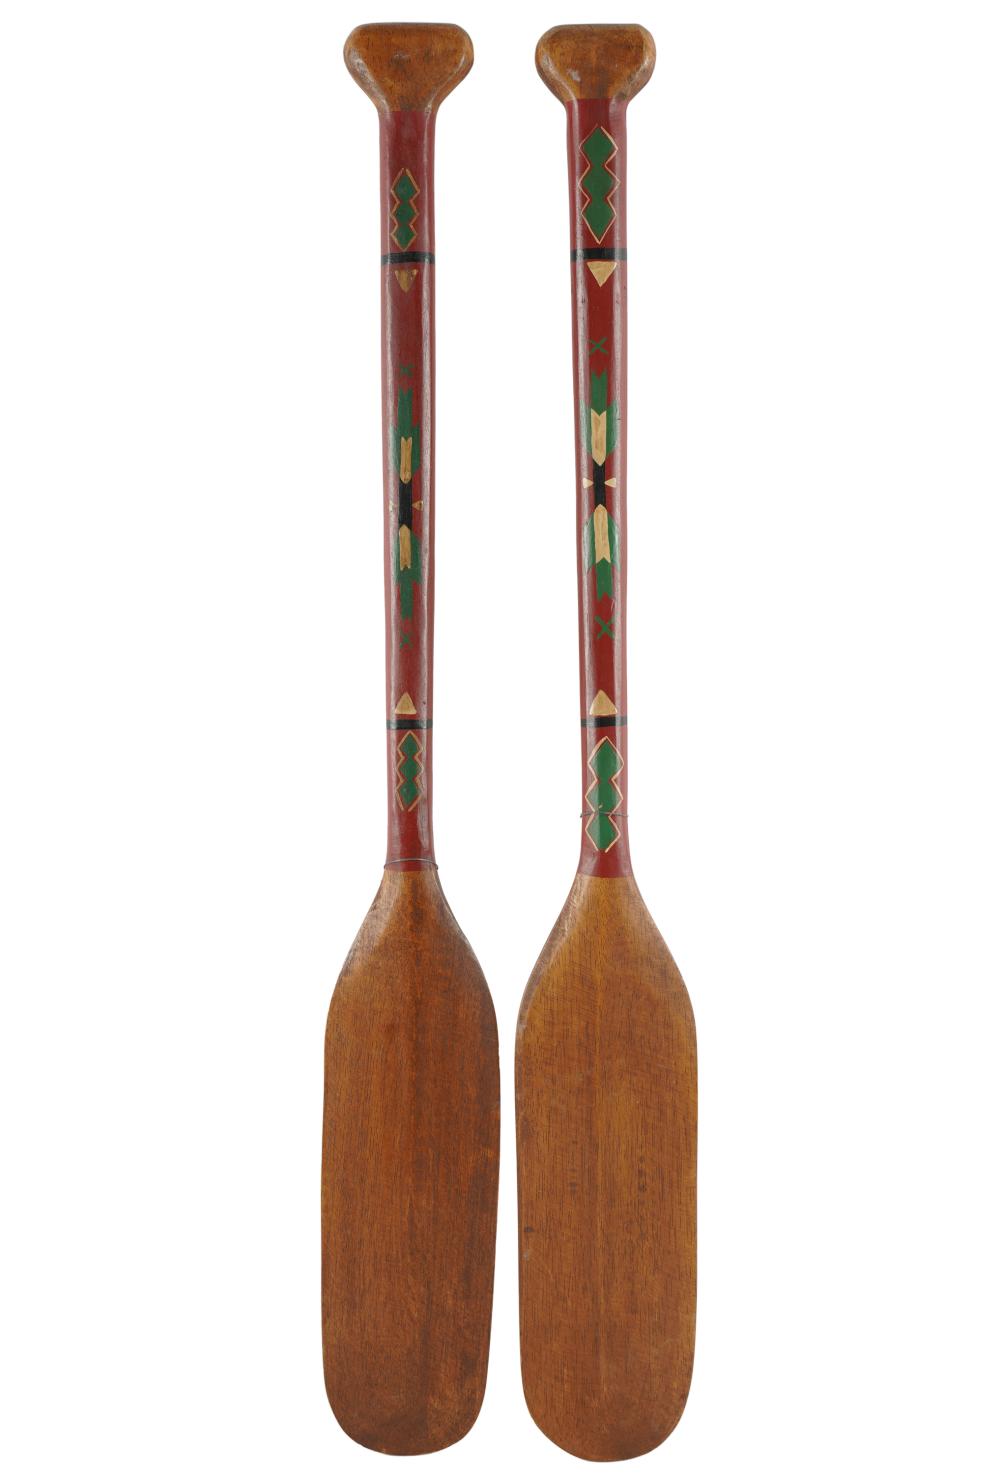 PAIR OF PAINTED WOOD PADDLESProvenance: